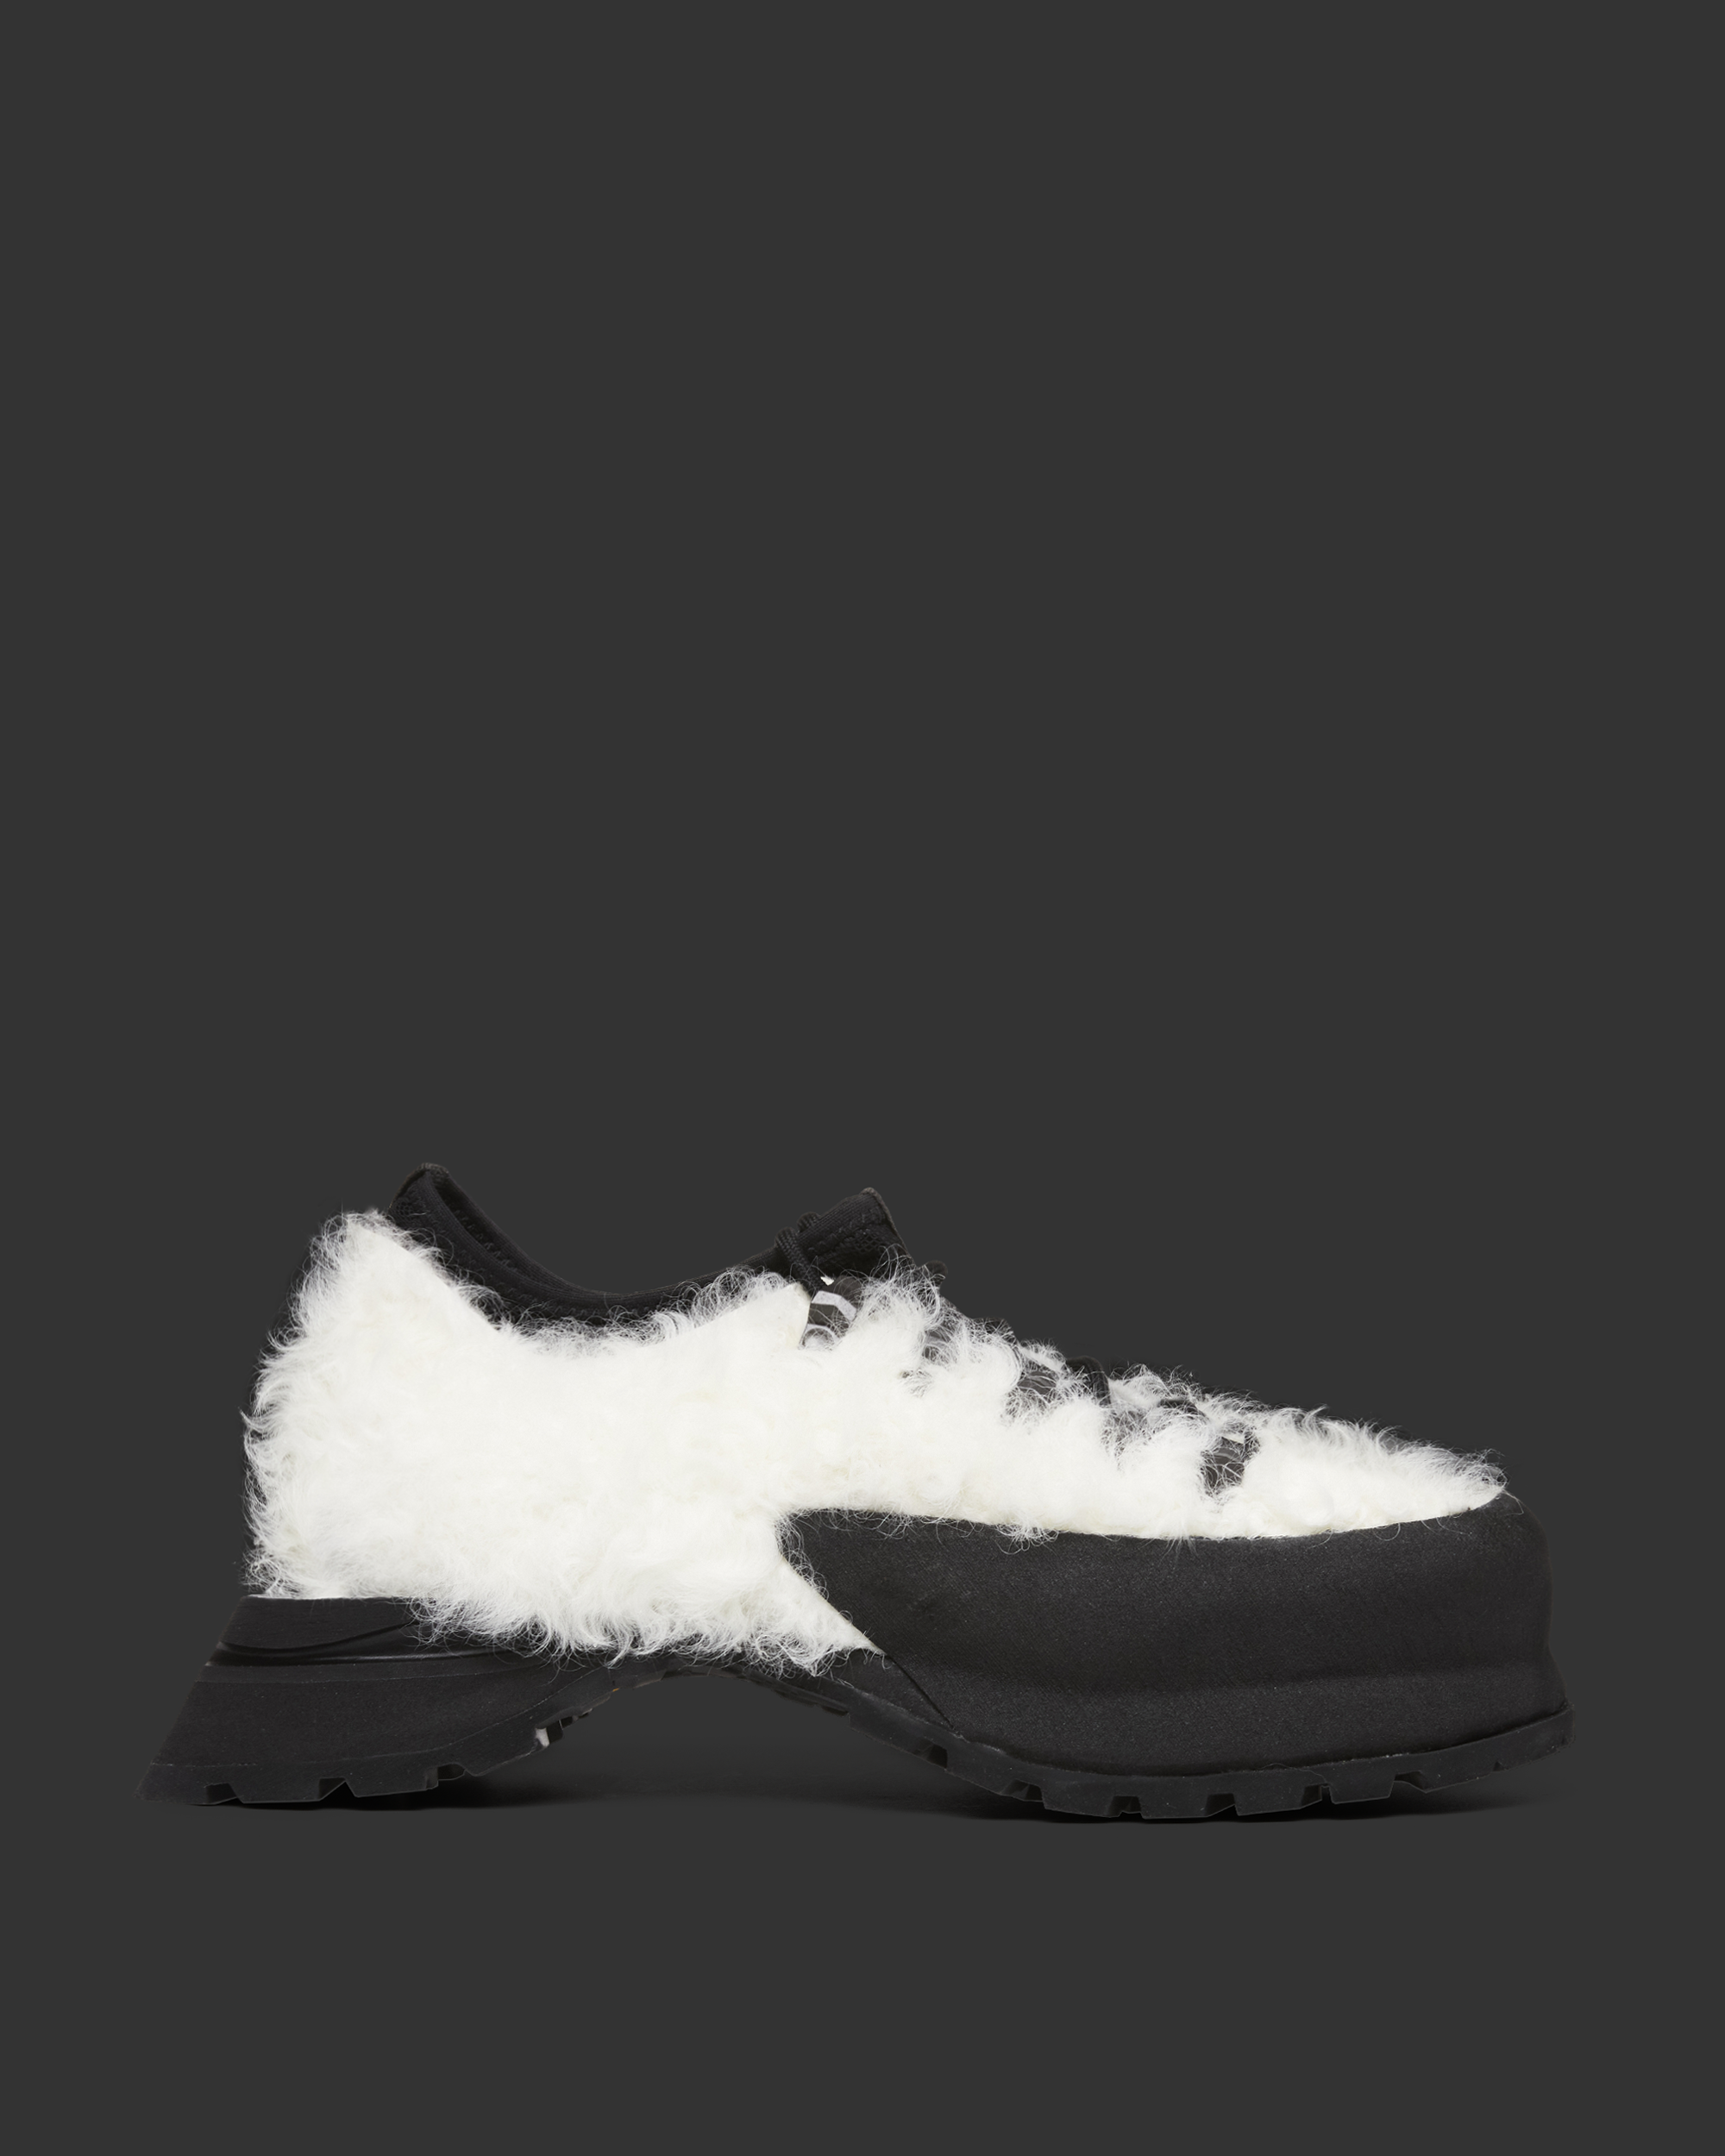 Made of flexible and delicate sheepskin, it fully embodies the essence